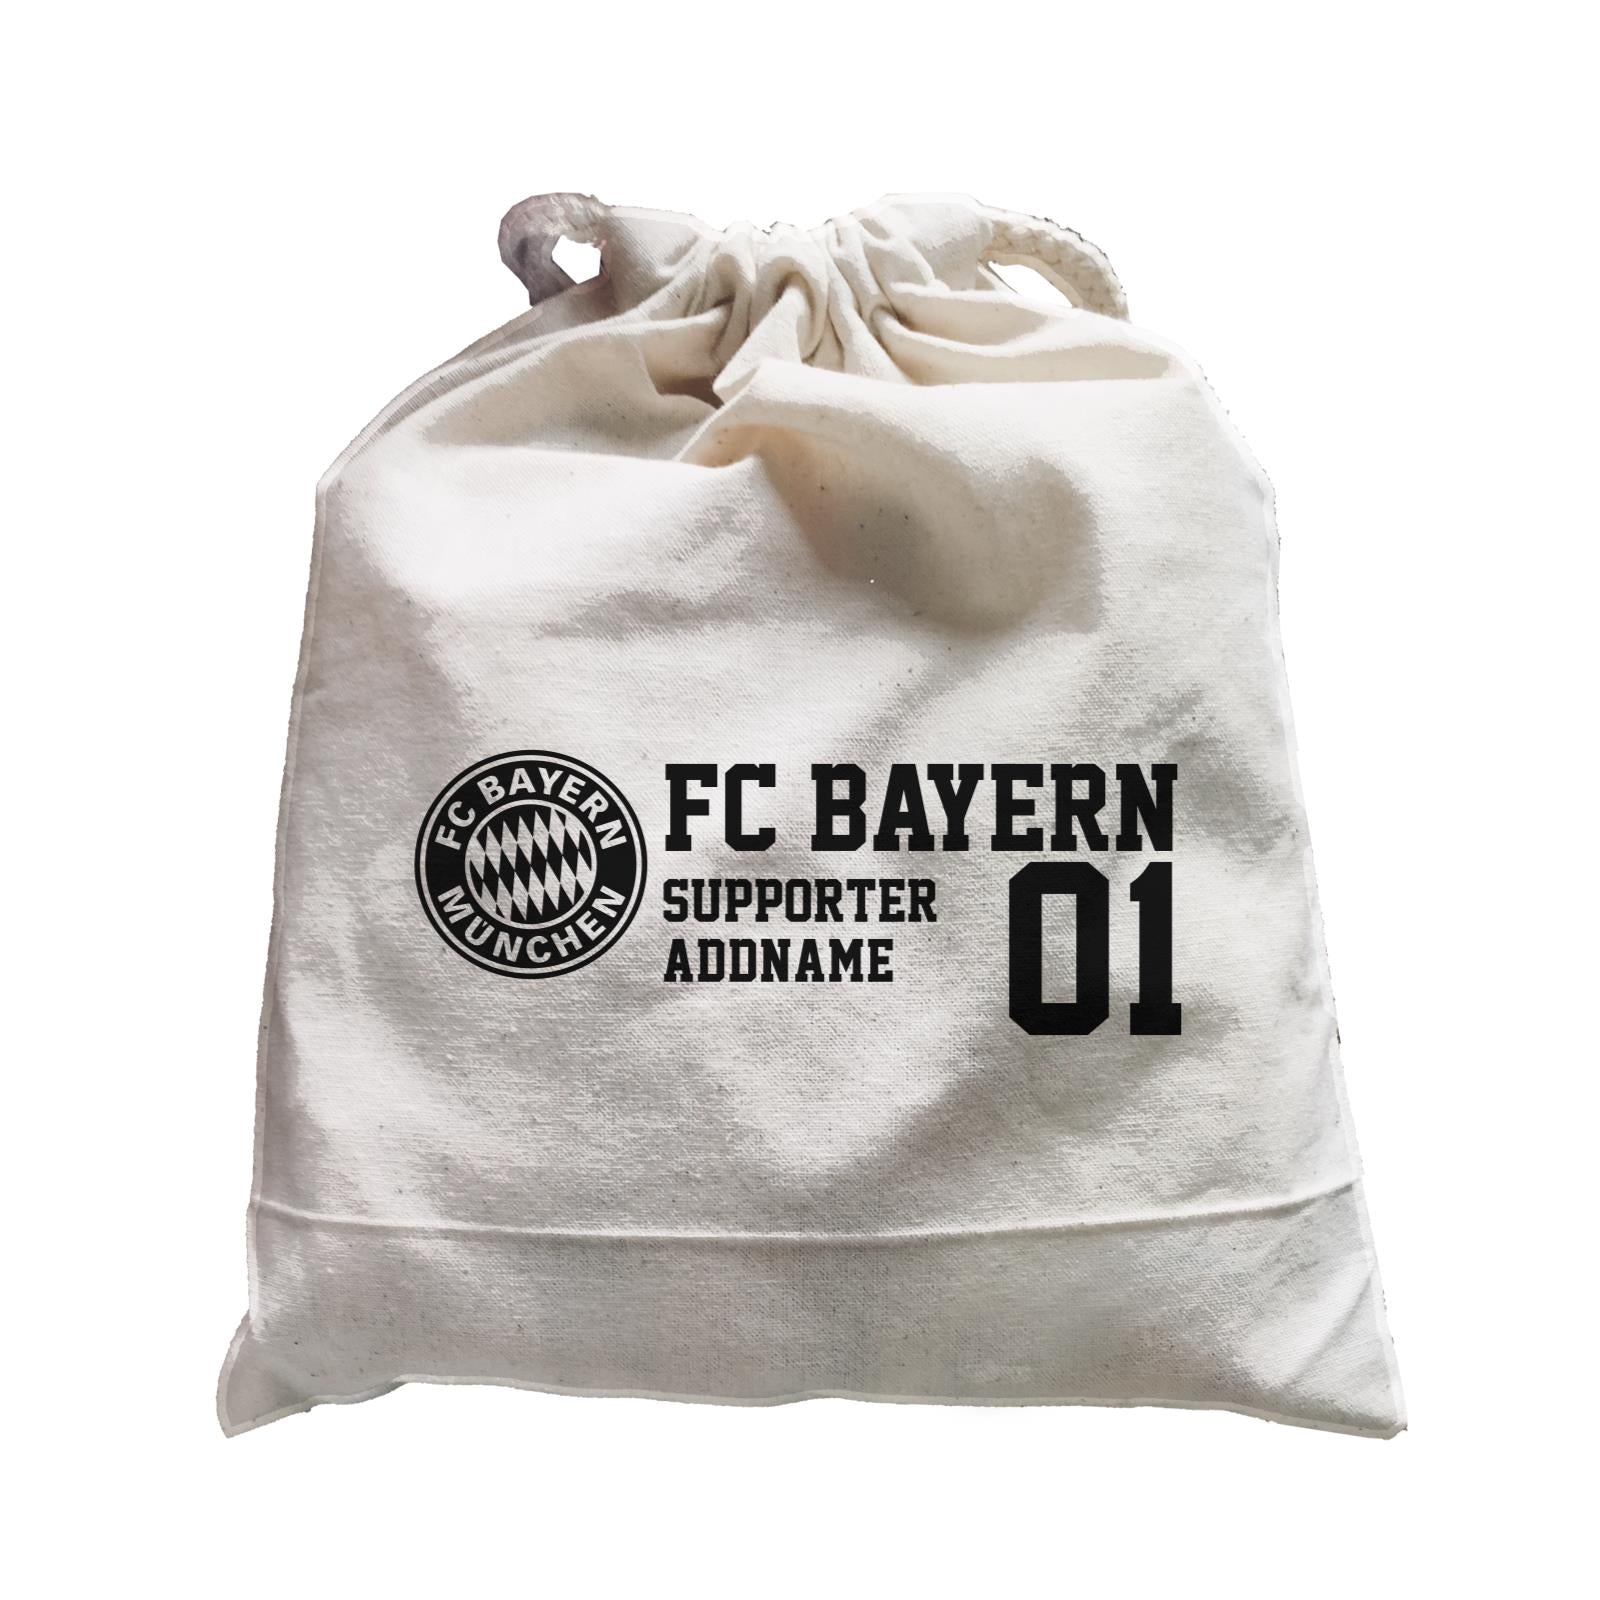 FC Bayern Football Supporter Accessories Addname Satchel